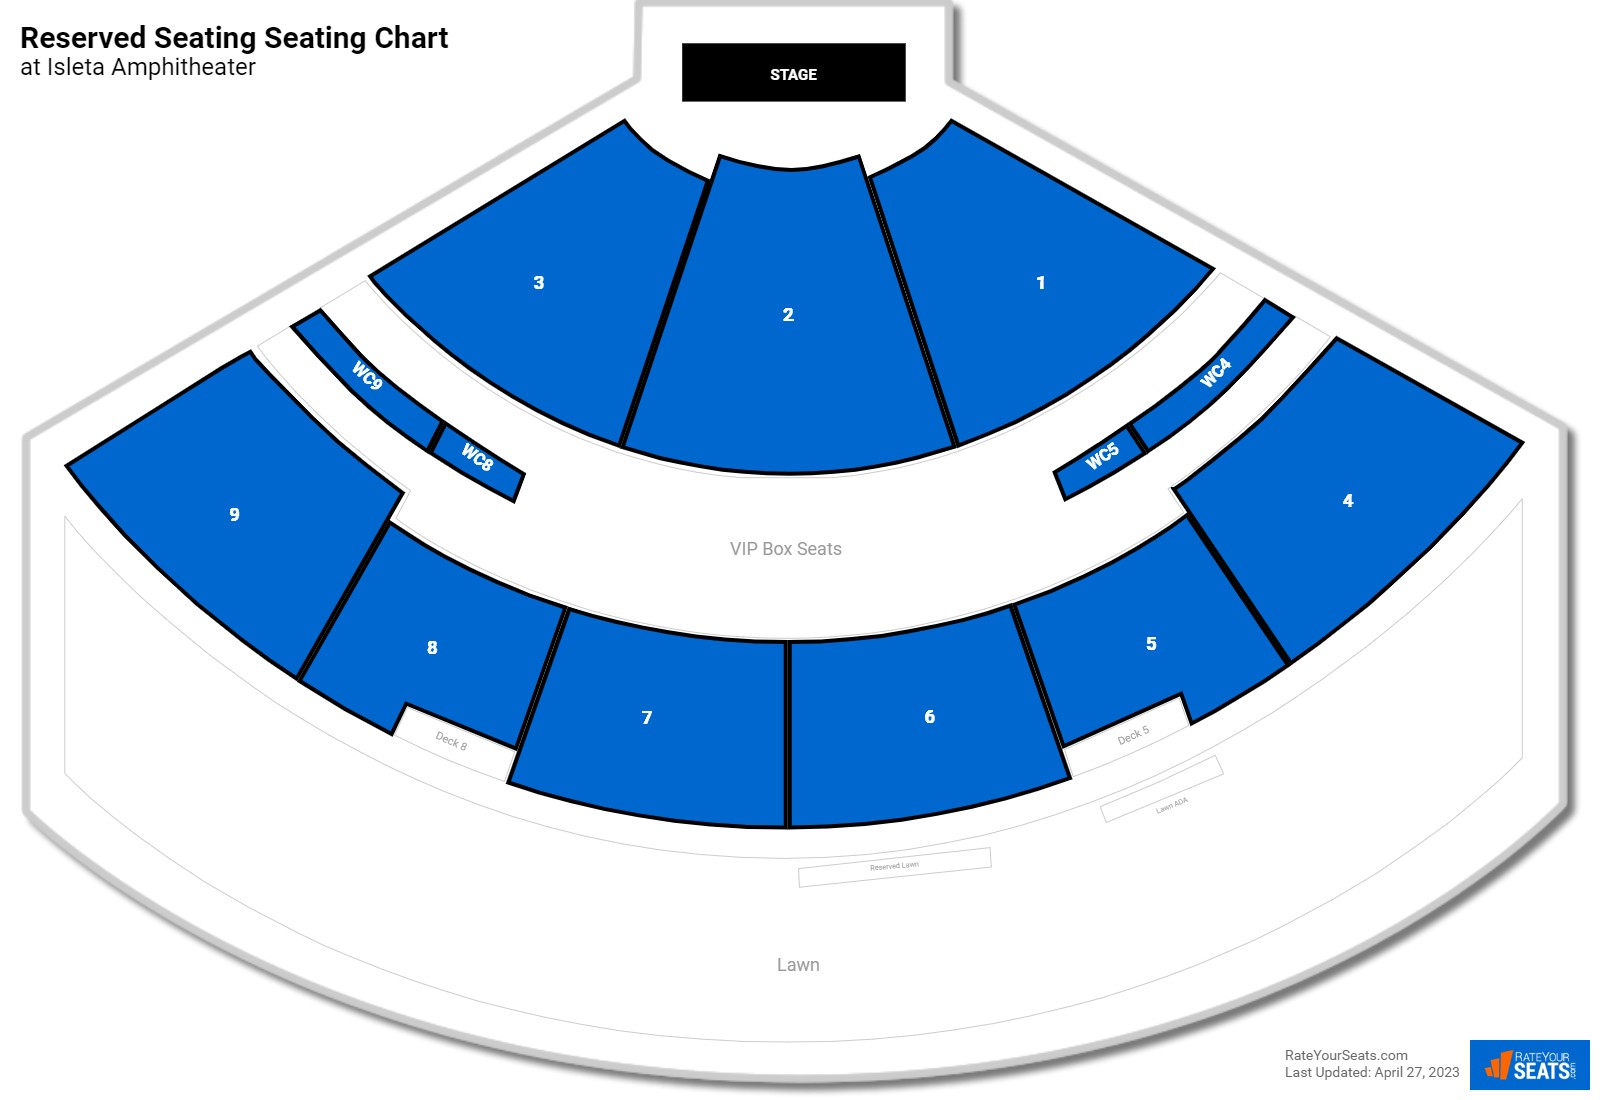 Concert Reserved Seating Seating Chart at Isleta Amphitheater